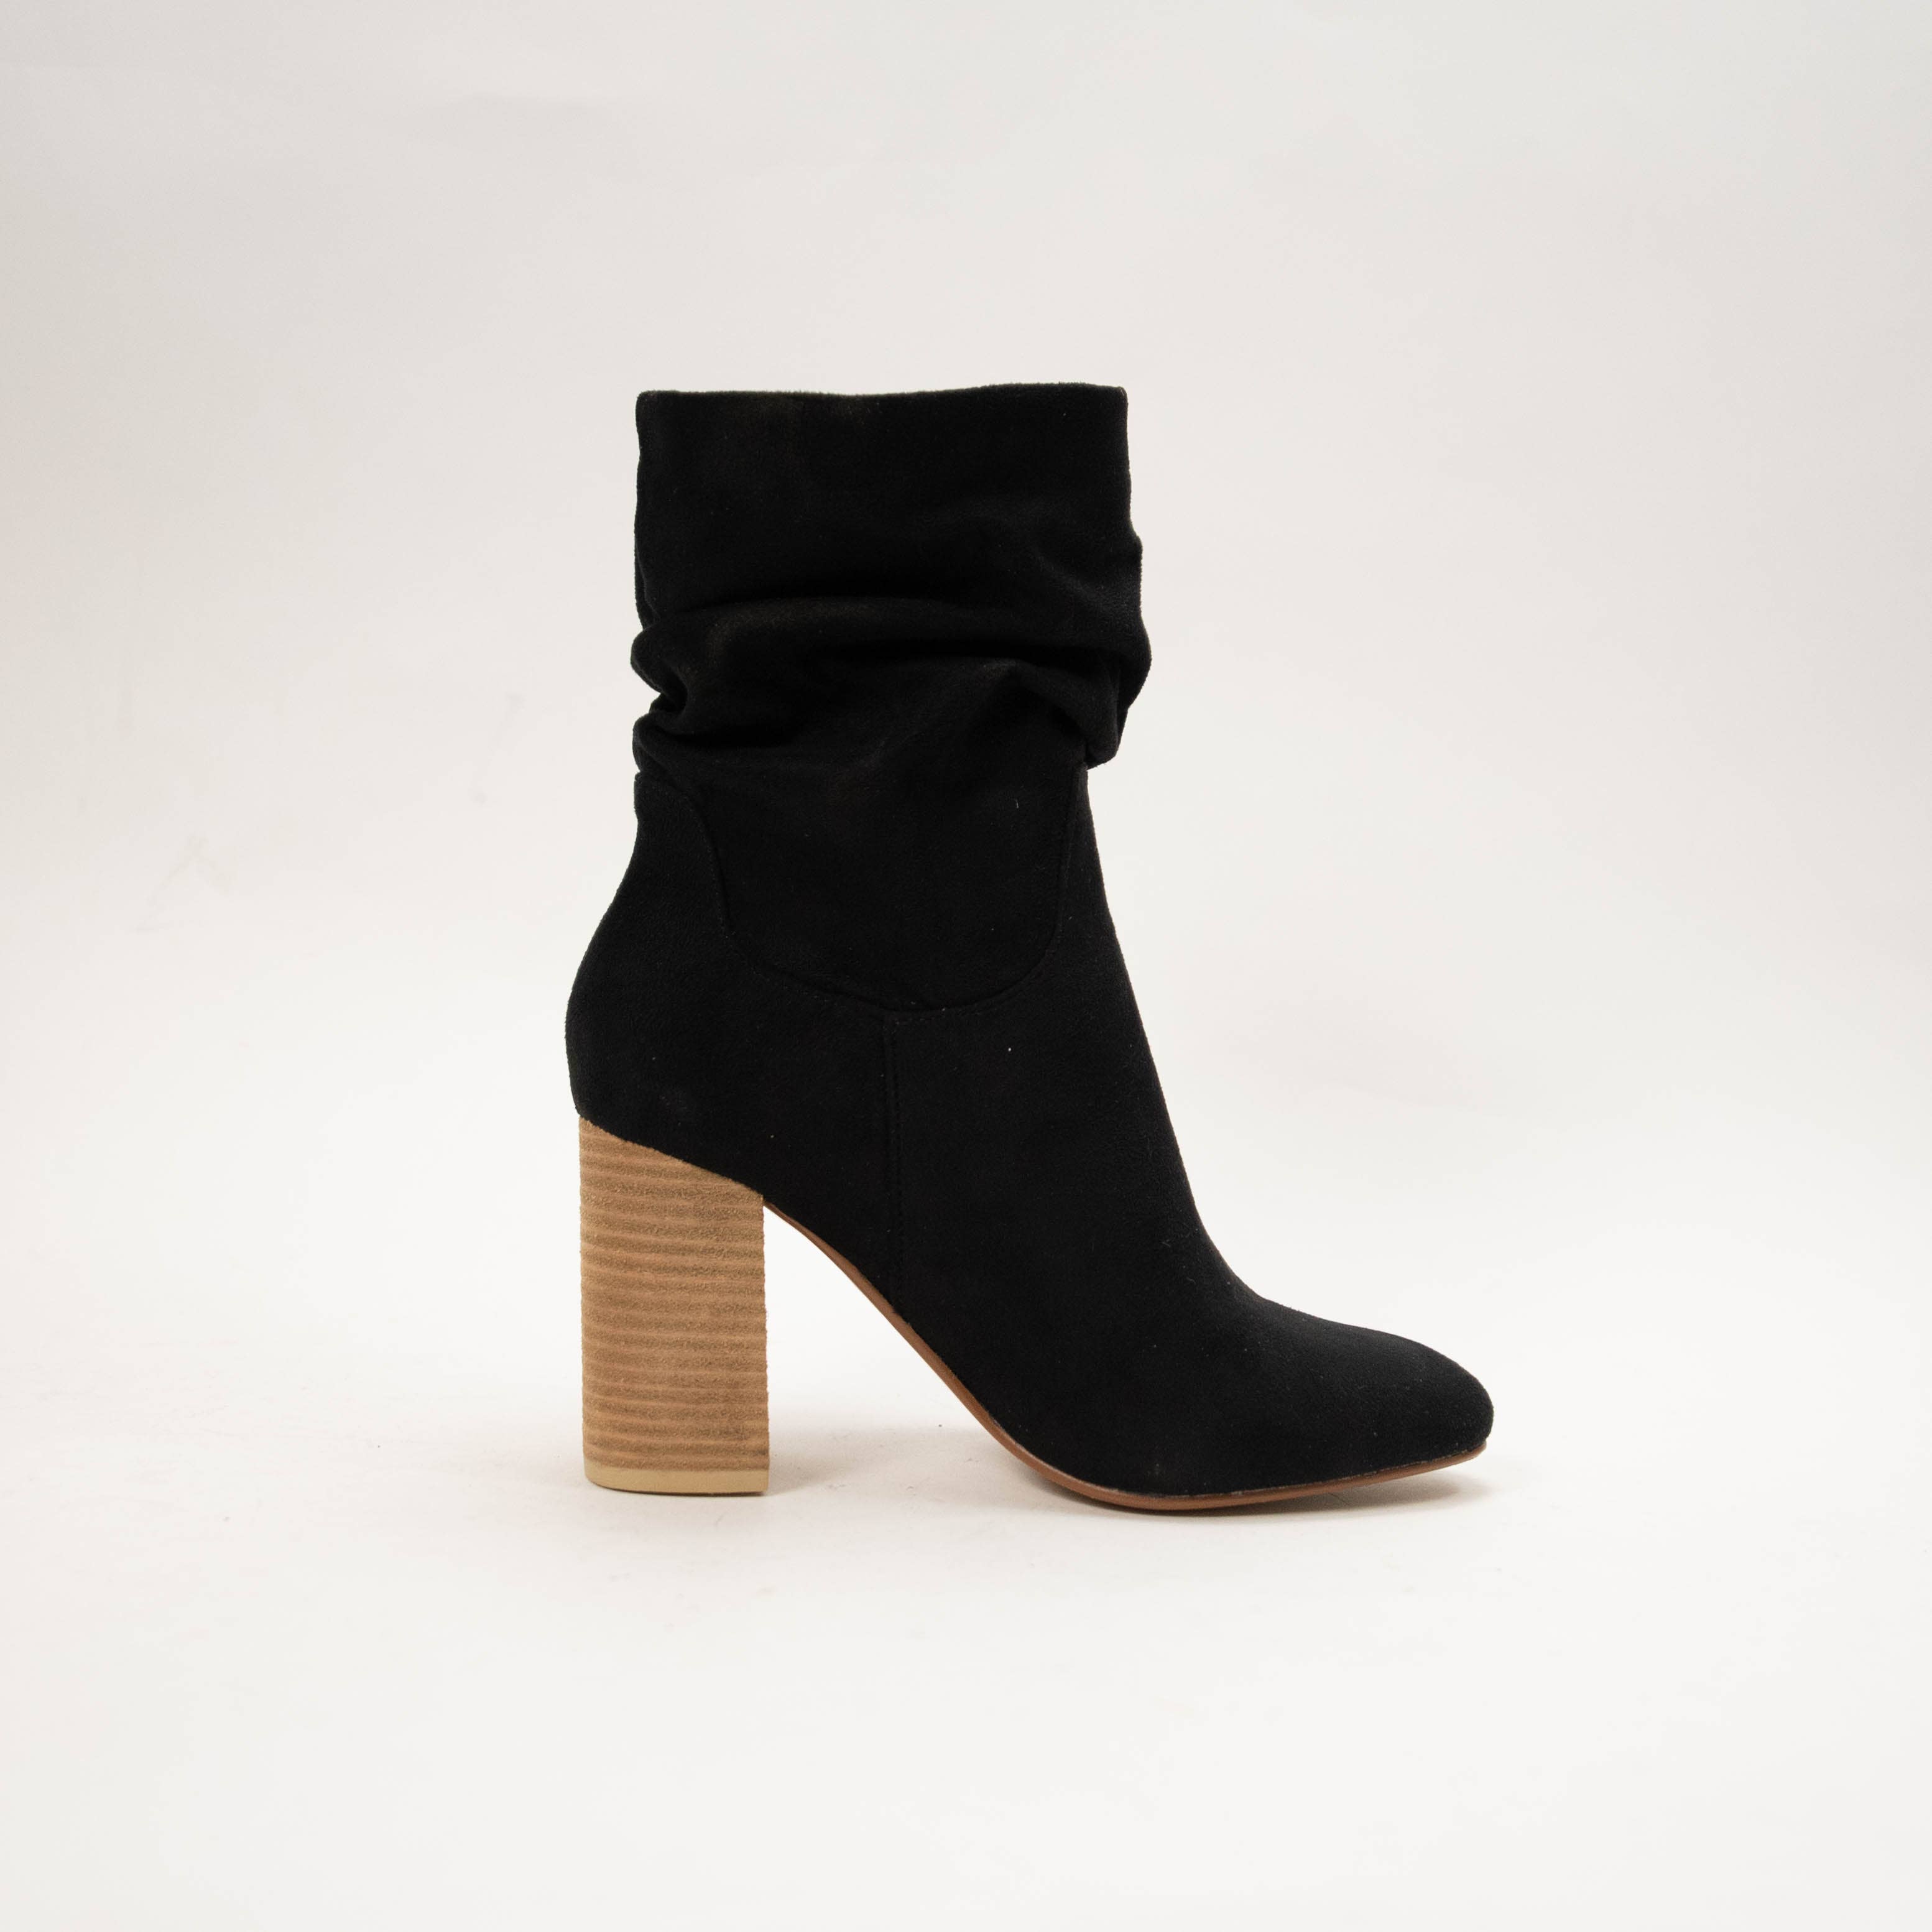 Darby Heeled Bootie